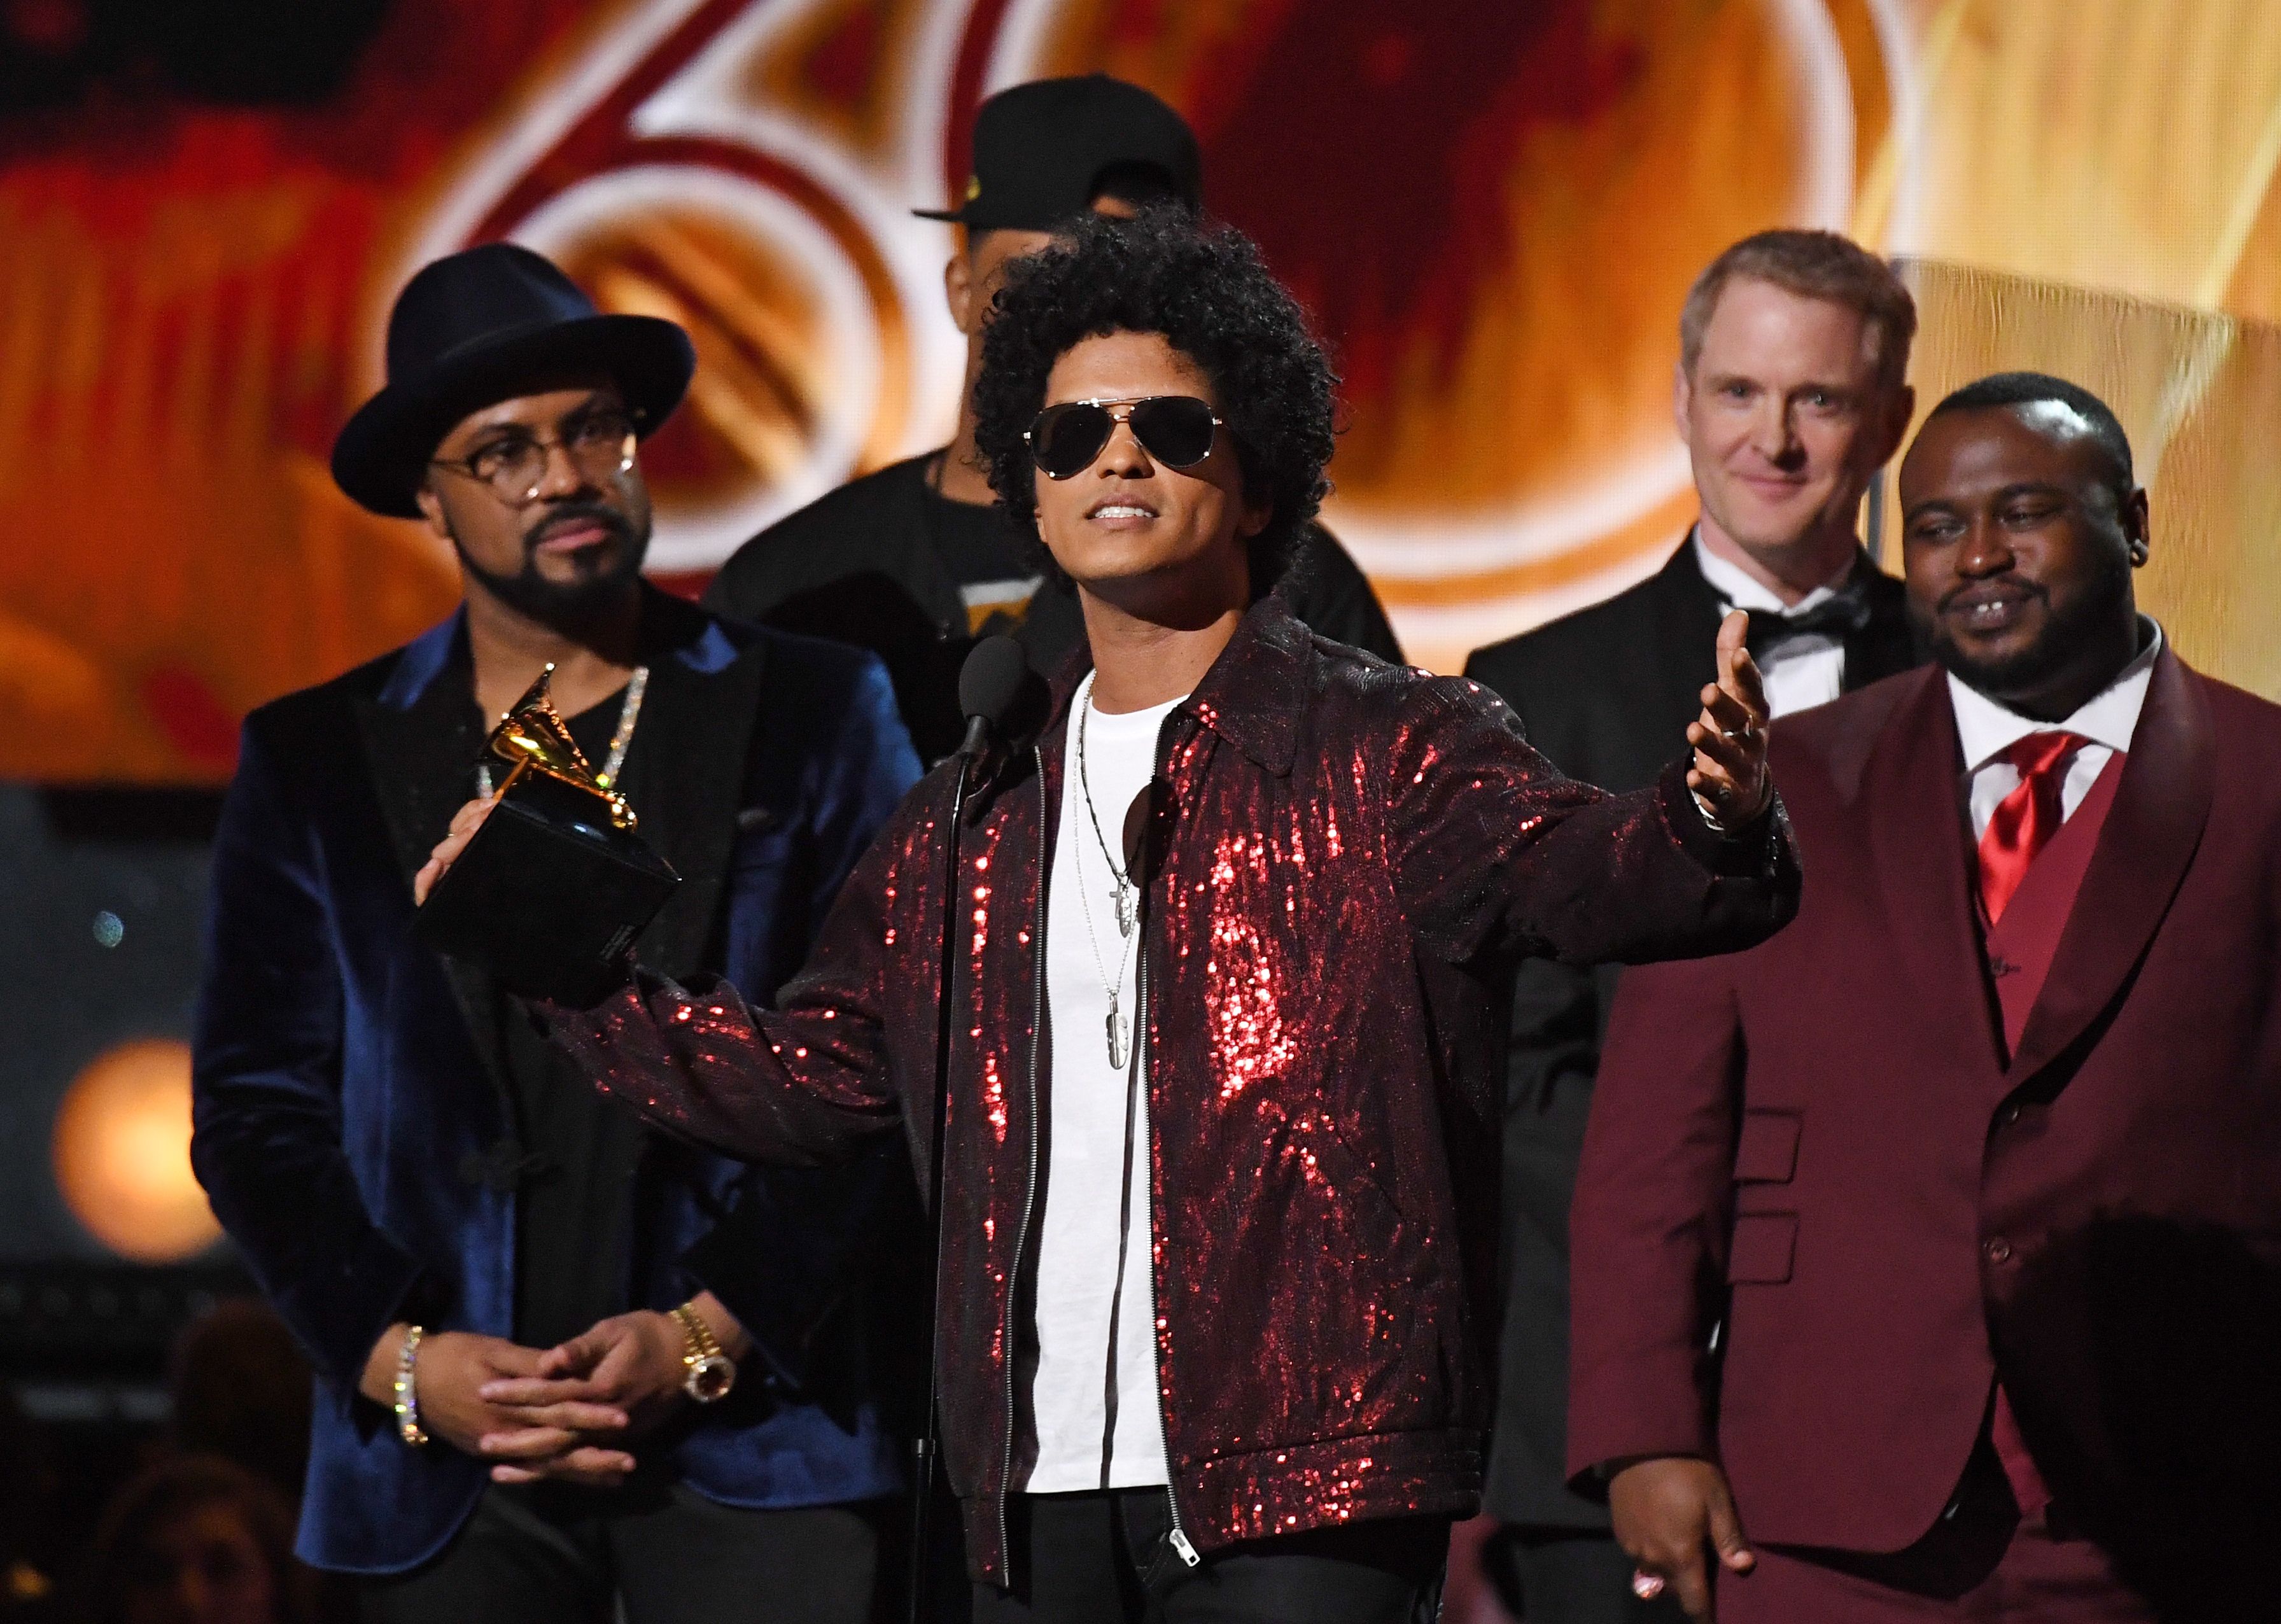 Bruno Mars receives his third Grammy for Album of the Year during the 60th Annual Grammy Awards show on January 28, 2018, in New York. / AFP PHOTO / Timothy A. CLARY (Photo credit should read TIMOTHY A. CLARY/AFP/Getty Images)